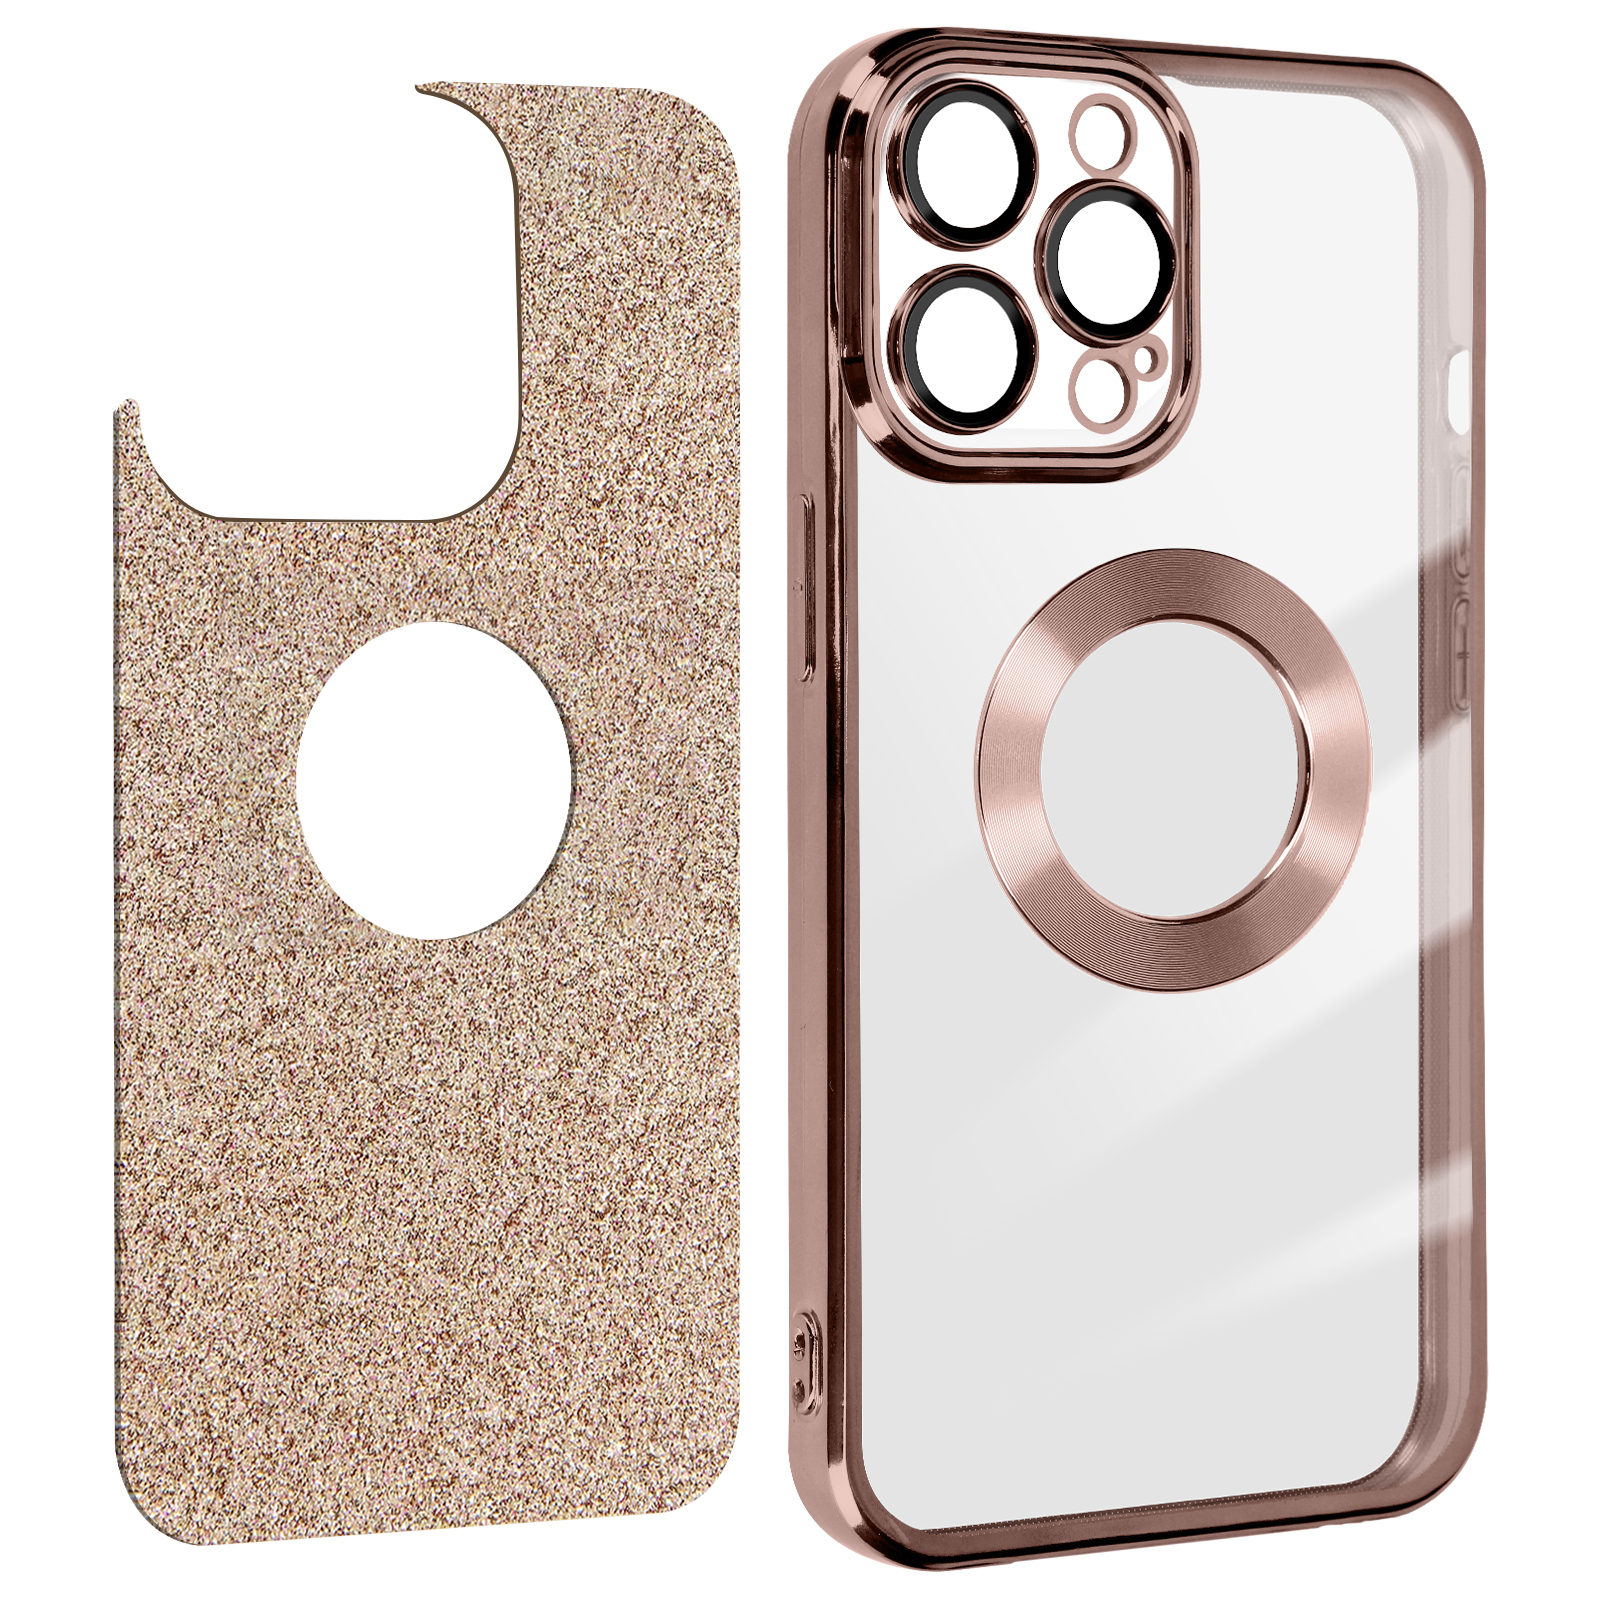 AVIZAR Protecam Pro Apple, Spark Backcover, Max, Rosegold 12 Series, iPhone